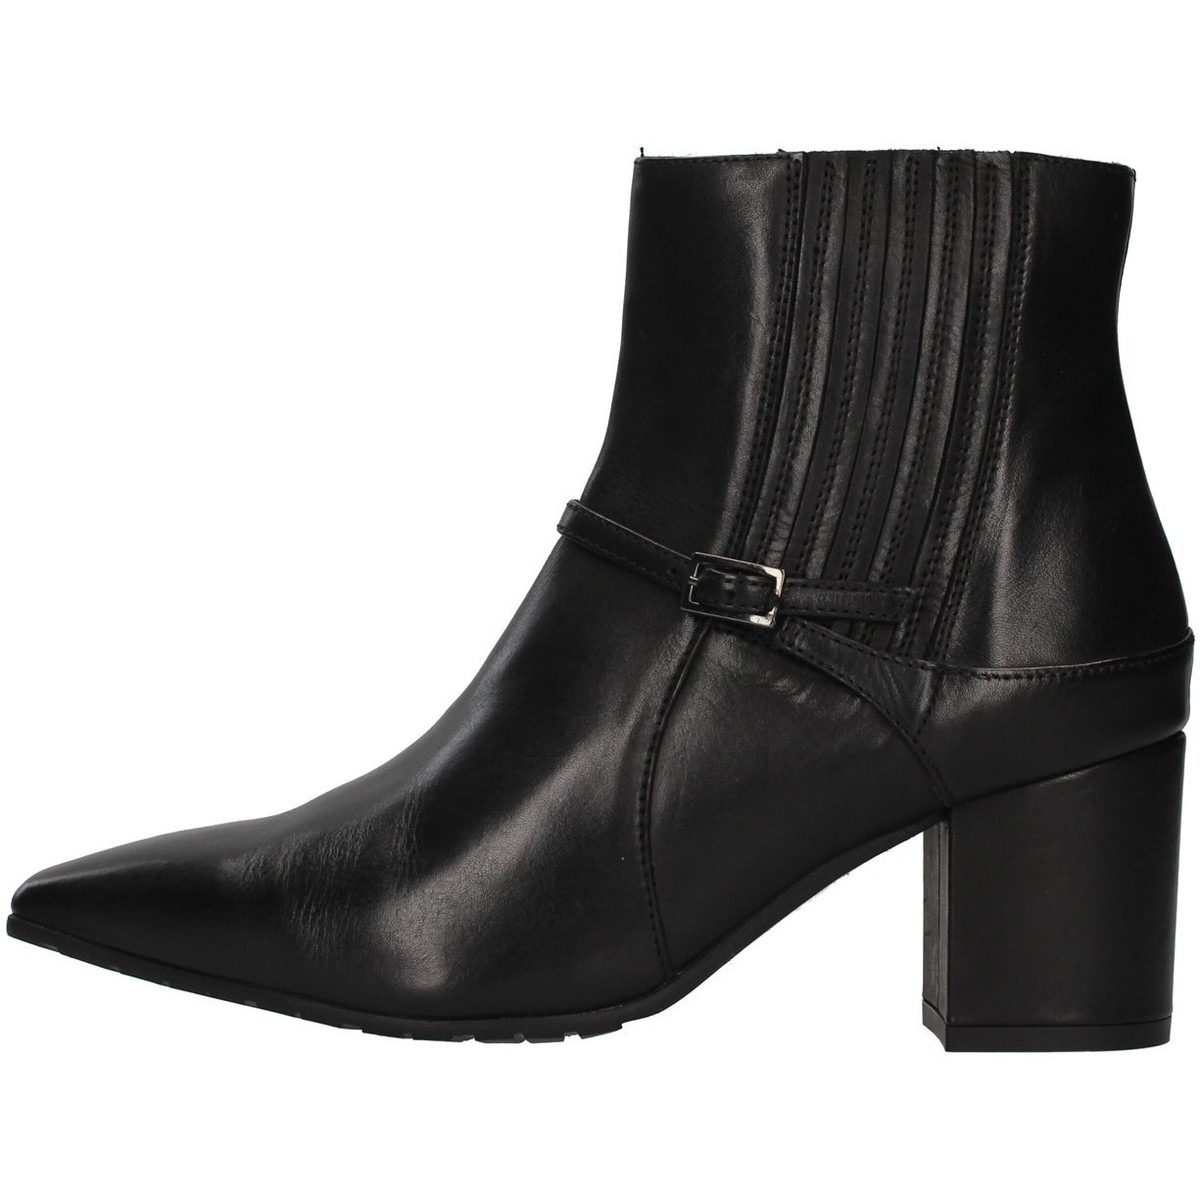 Spartoo Ankle Boots Black for Women by Paola Ferri GOOFASH